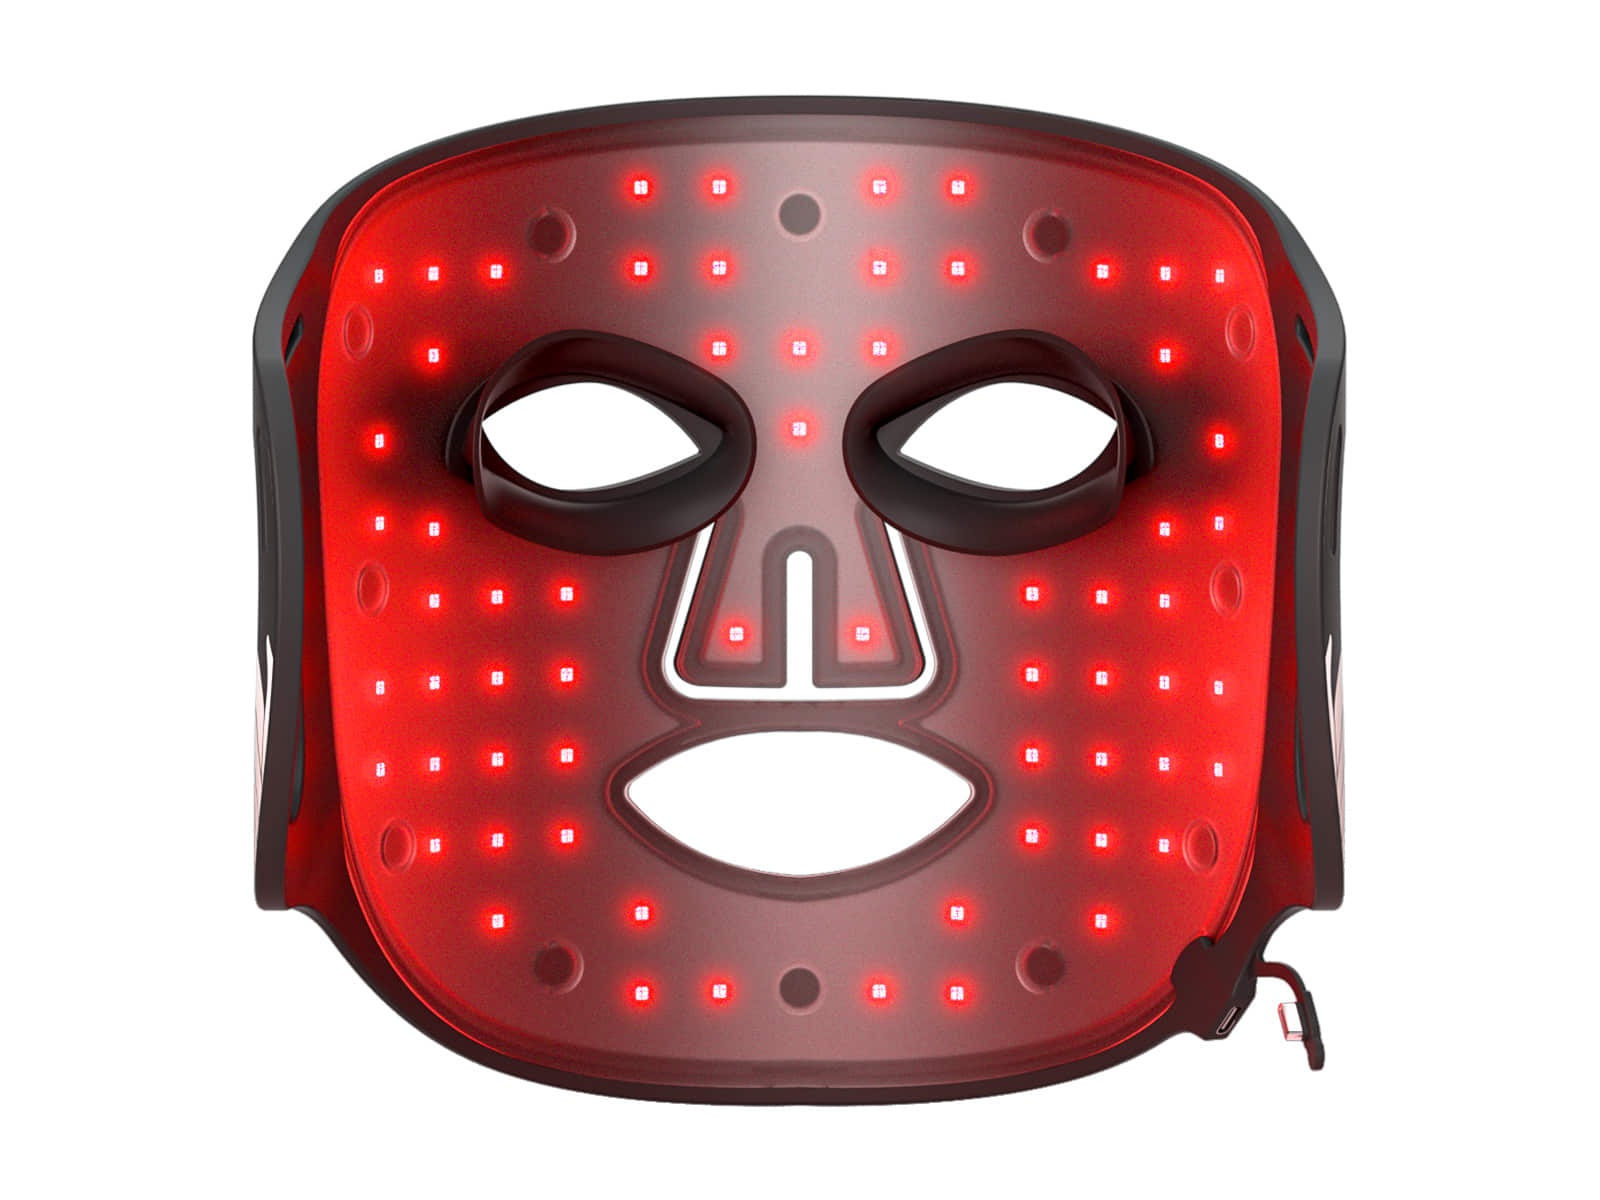 660nm Red 850nm Near infrared LED face mask